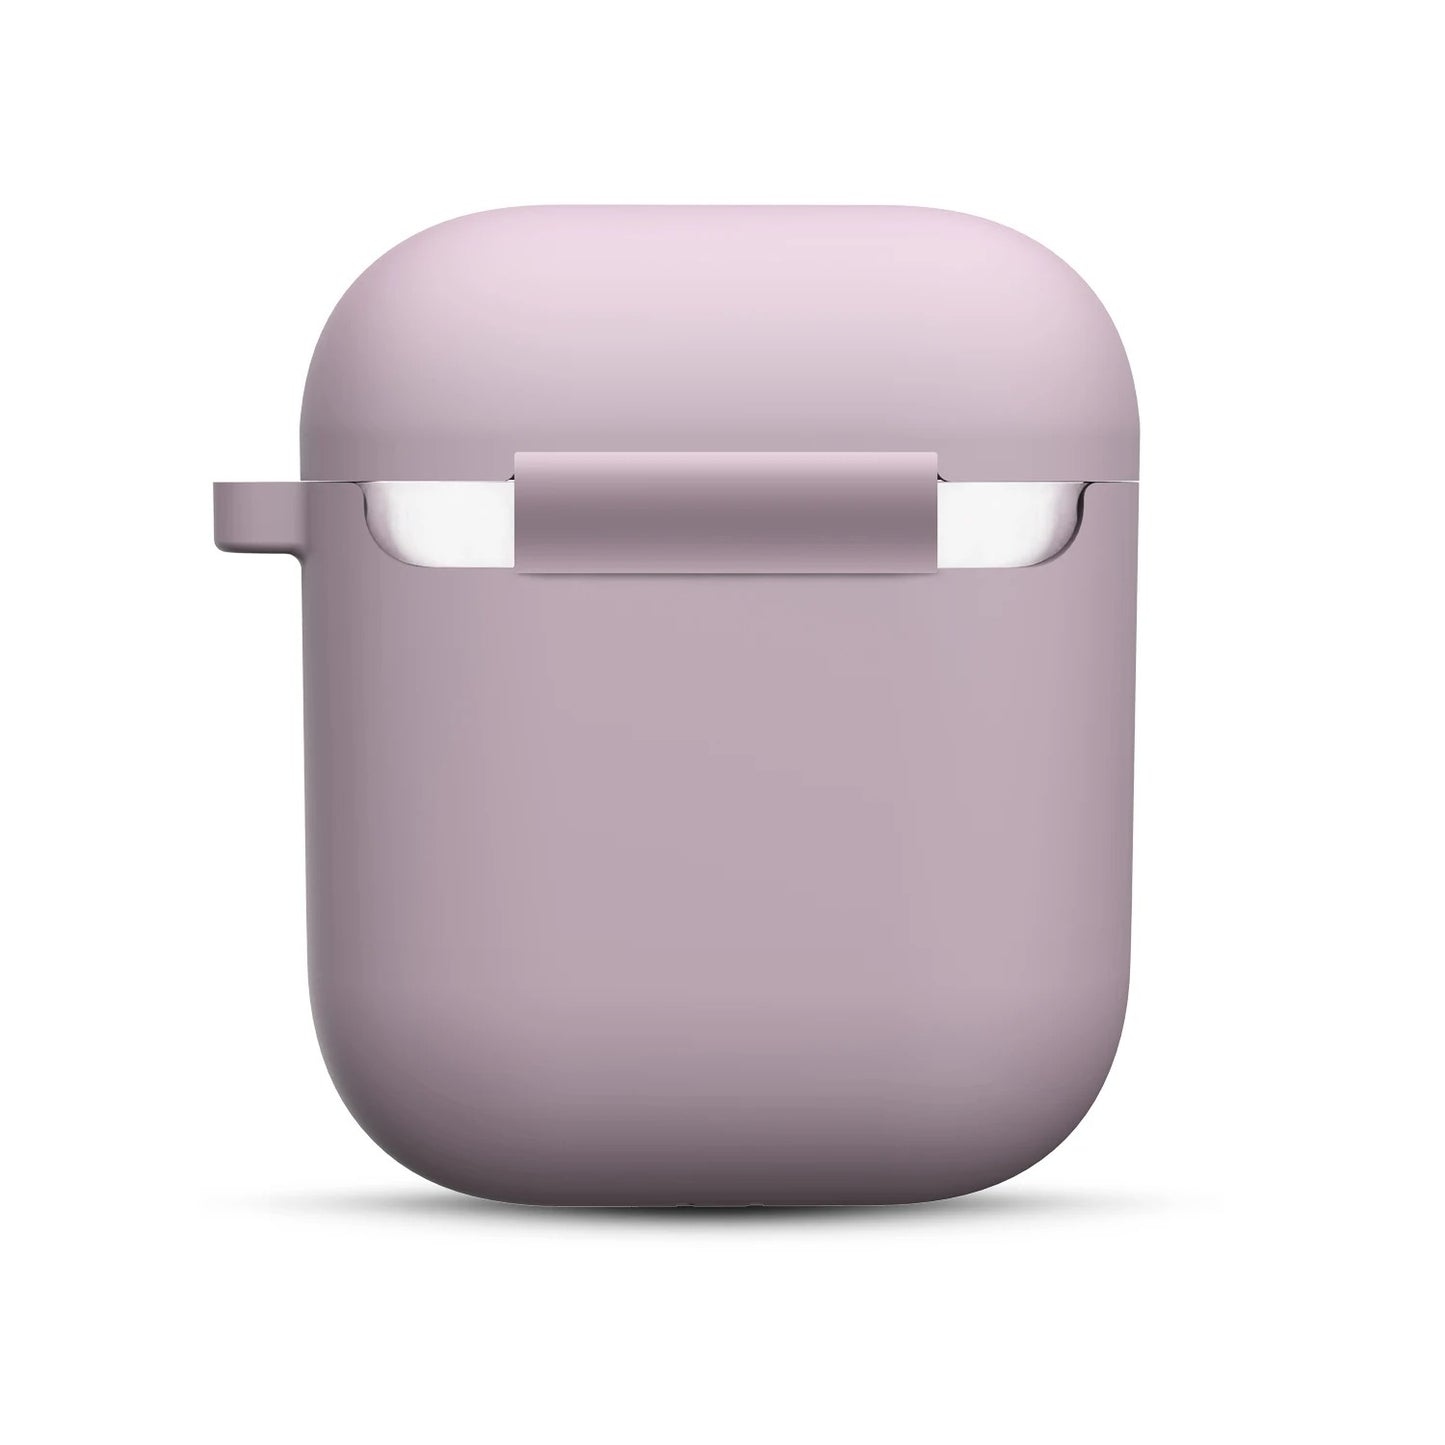 Apple Airpods case 1st, 2nd generation